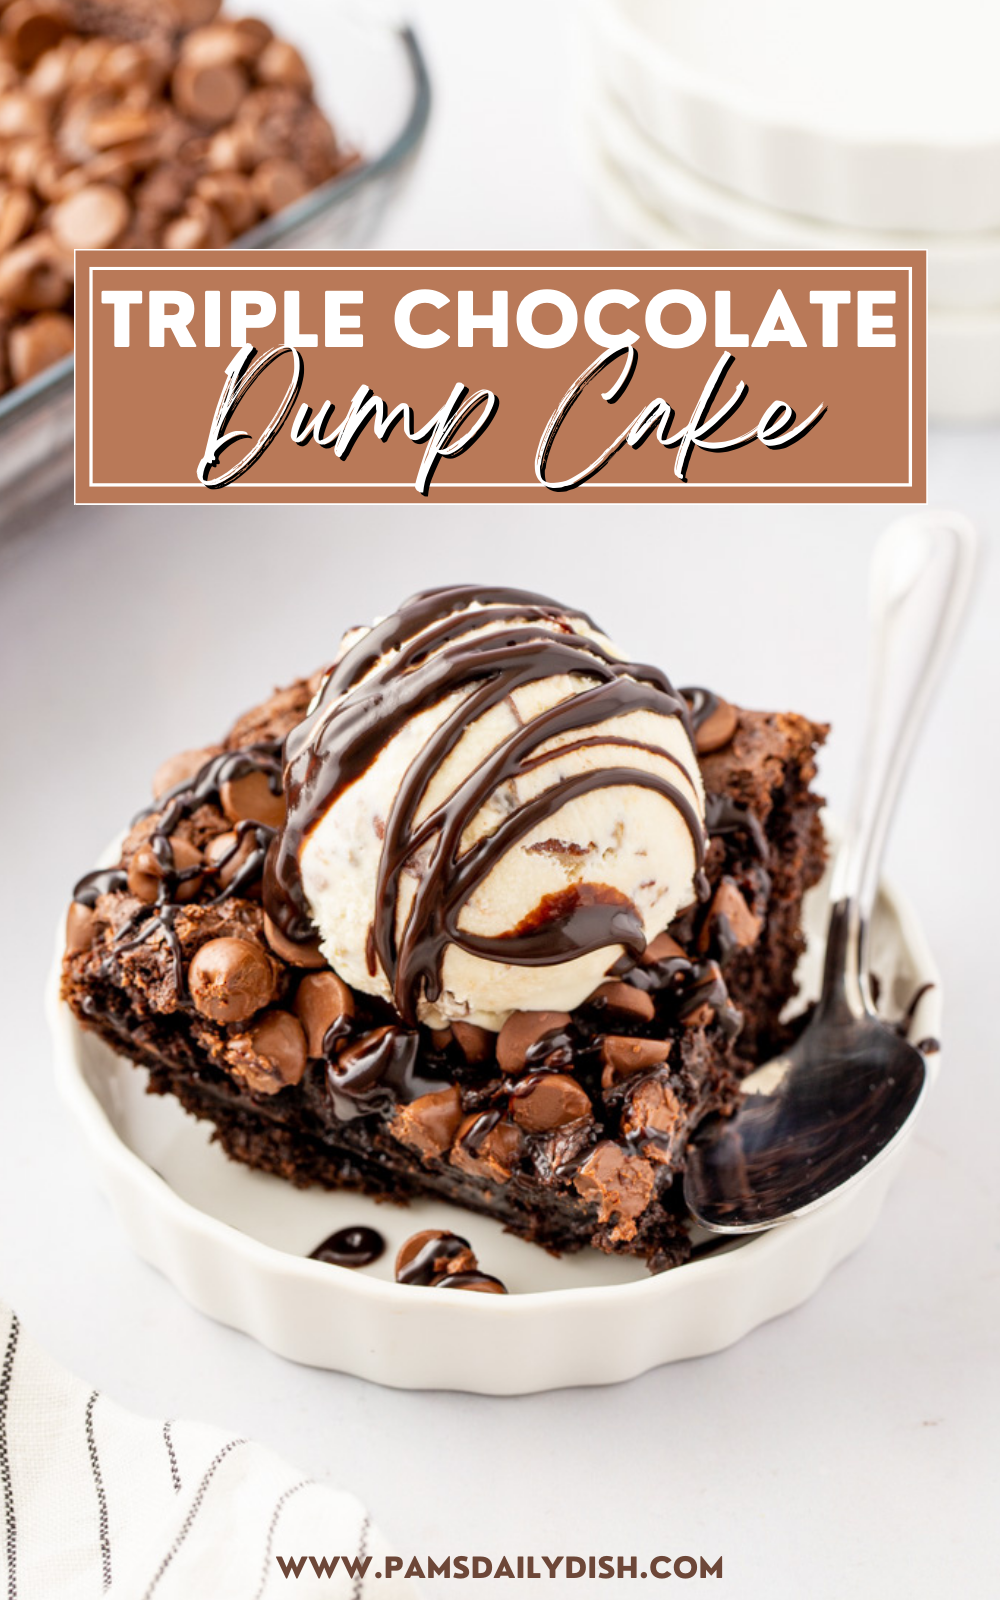 This triple chocolate dump cake is an extremely easy no-fuss dessert recipe. It went viral and was my most popular recipe for several years in a row, and for good reason! It is rich and chocolatey and oh so delicious. Its a quick and simple dessert I love to make for my friends and family. via @skinnydesserts